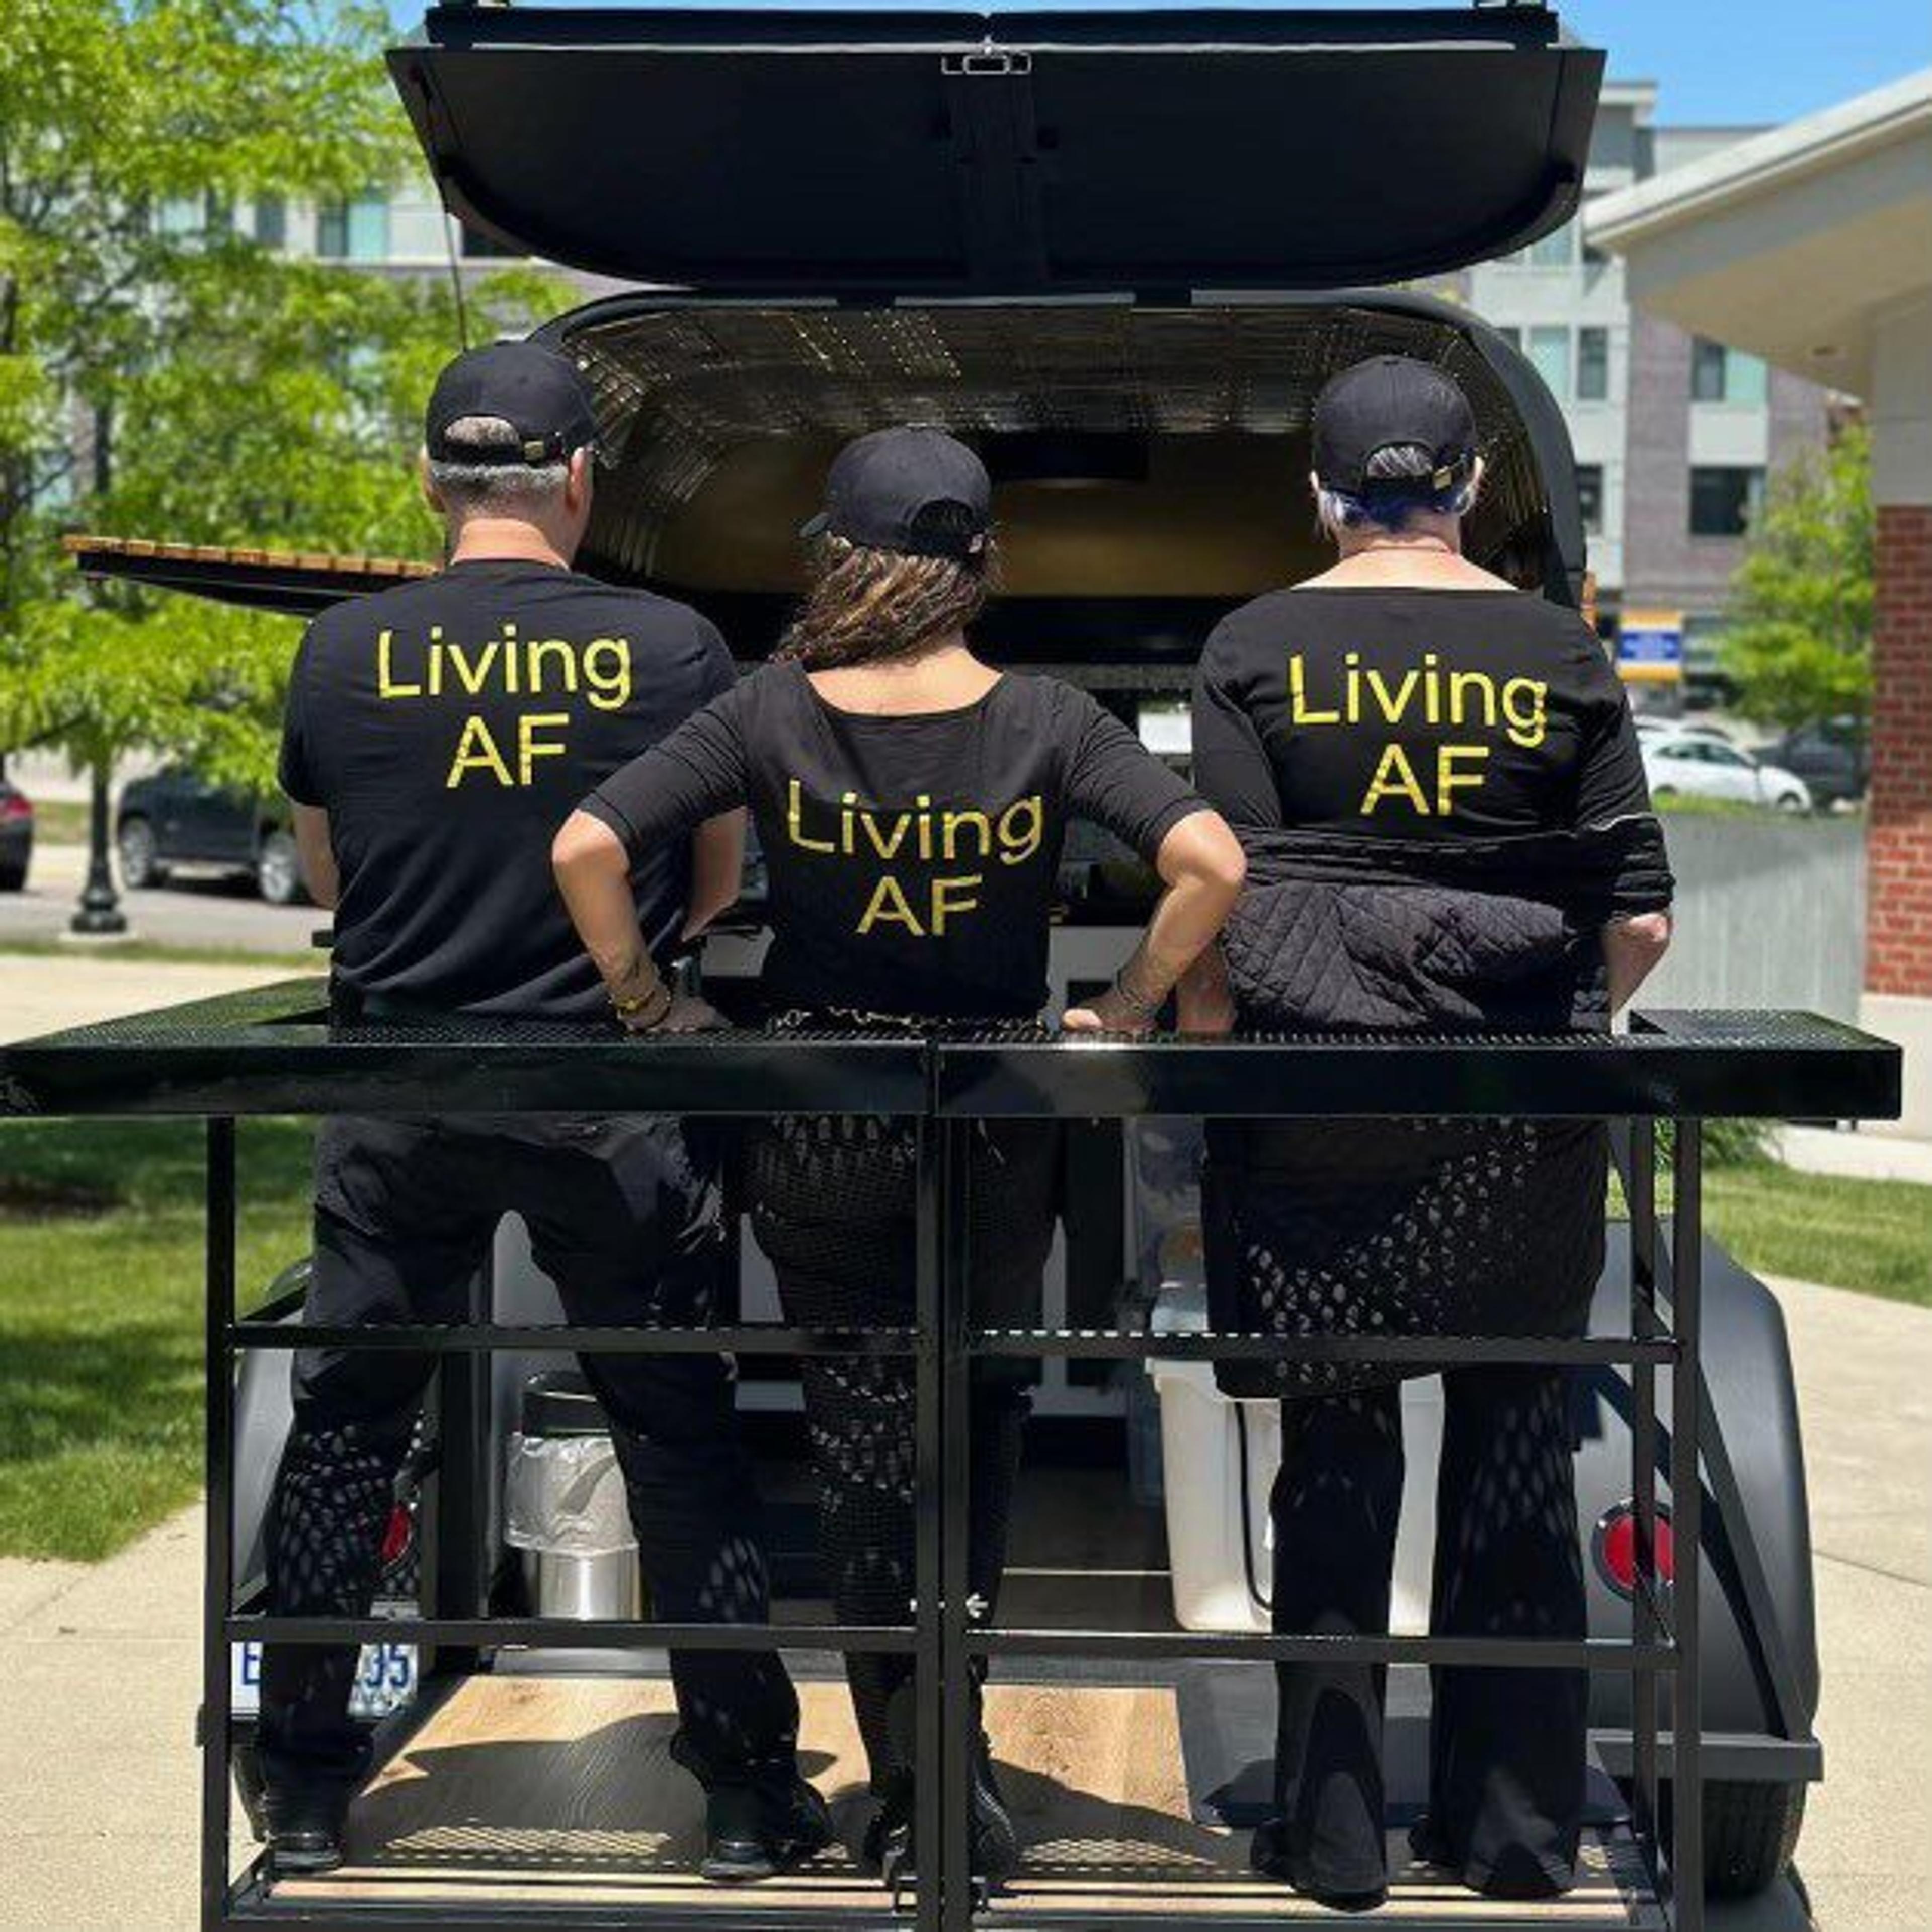 Josnelly Aponte-Martinez, Francisco Martinez and Sandy Yeager pose for a photo wearing T-shirts that read "Living AF," which stands for "Living Alcohol-Free."